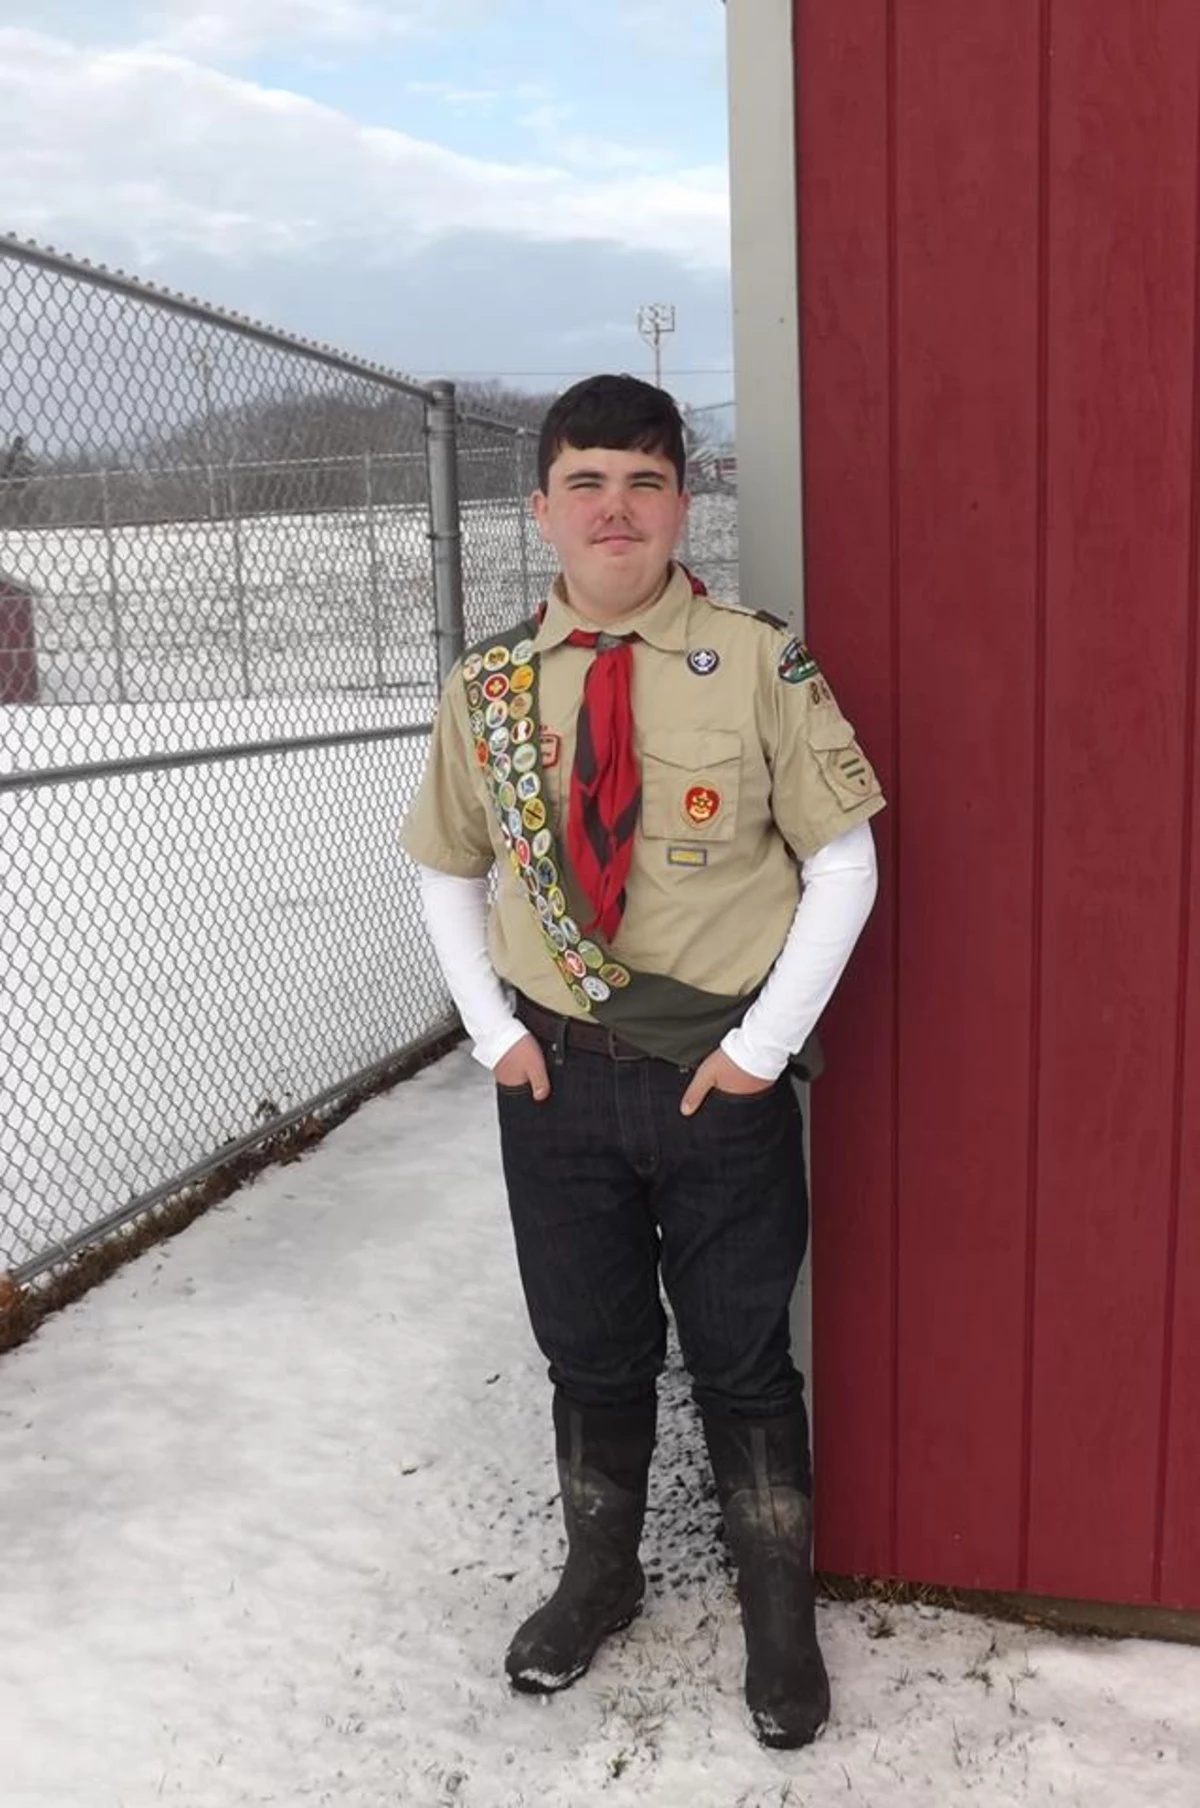 Hutchins Completes Eagle Scout Project at Ellsworth Elementary-Middle School